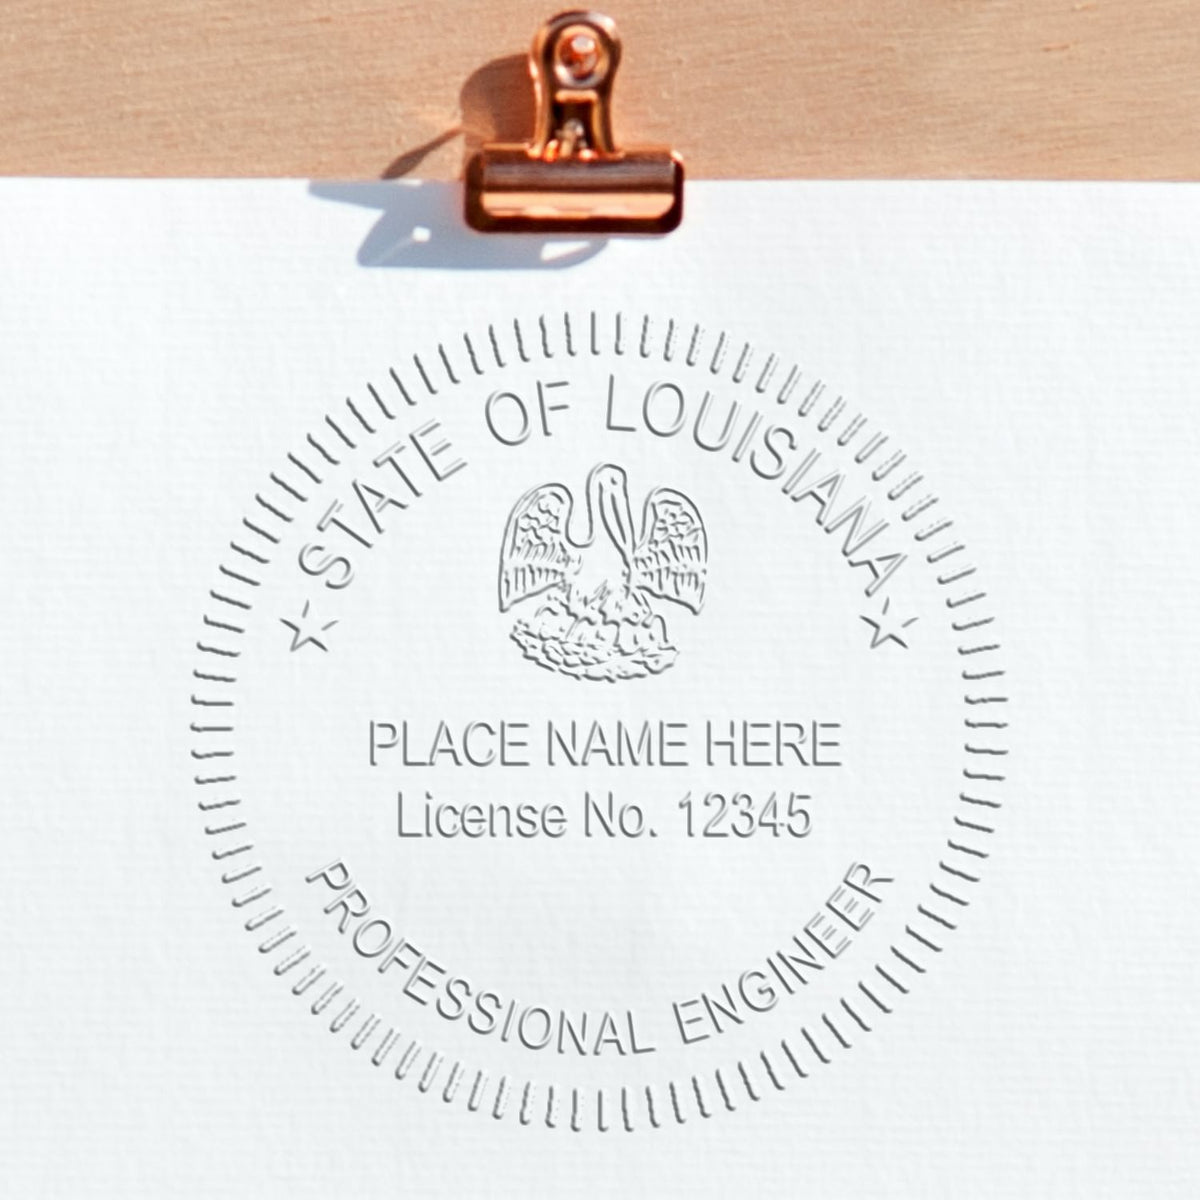 A photograph of the Louisiana Engineer Desk Seal stamp impression reveals a vivid, professional image of the on paper.